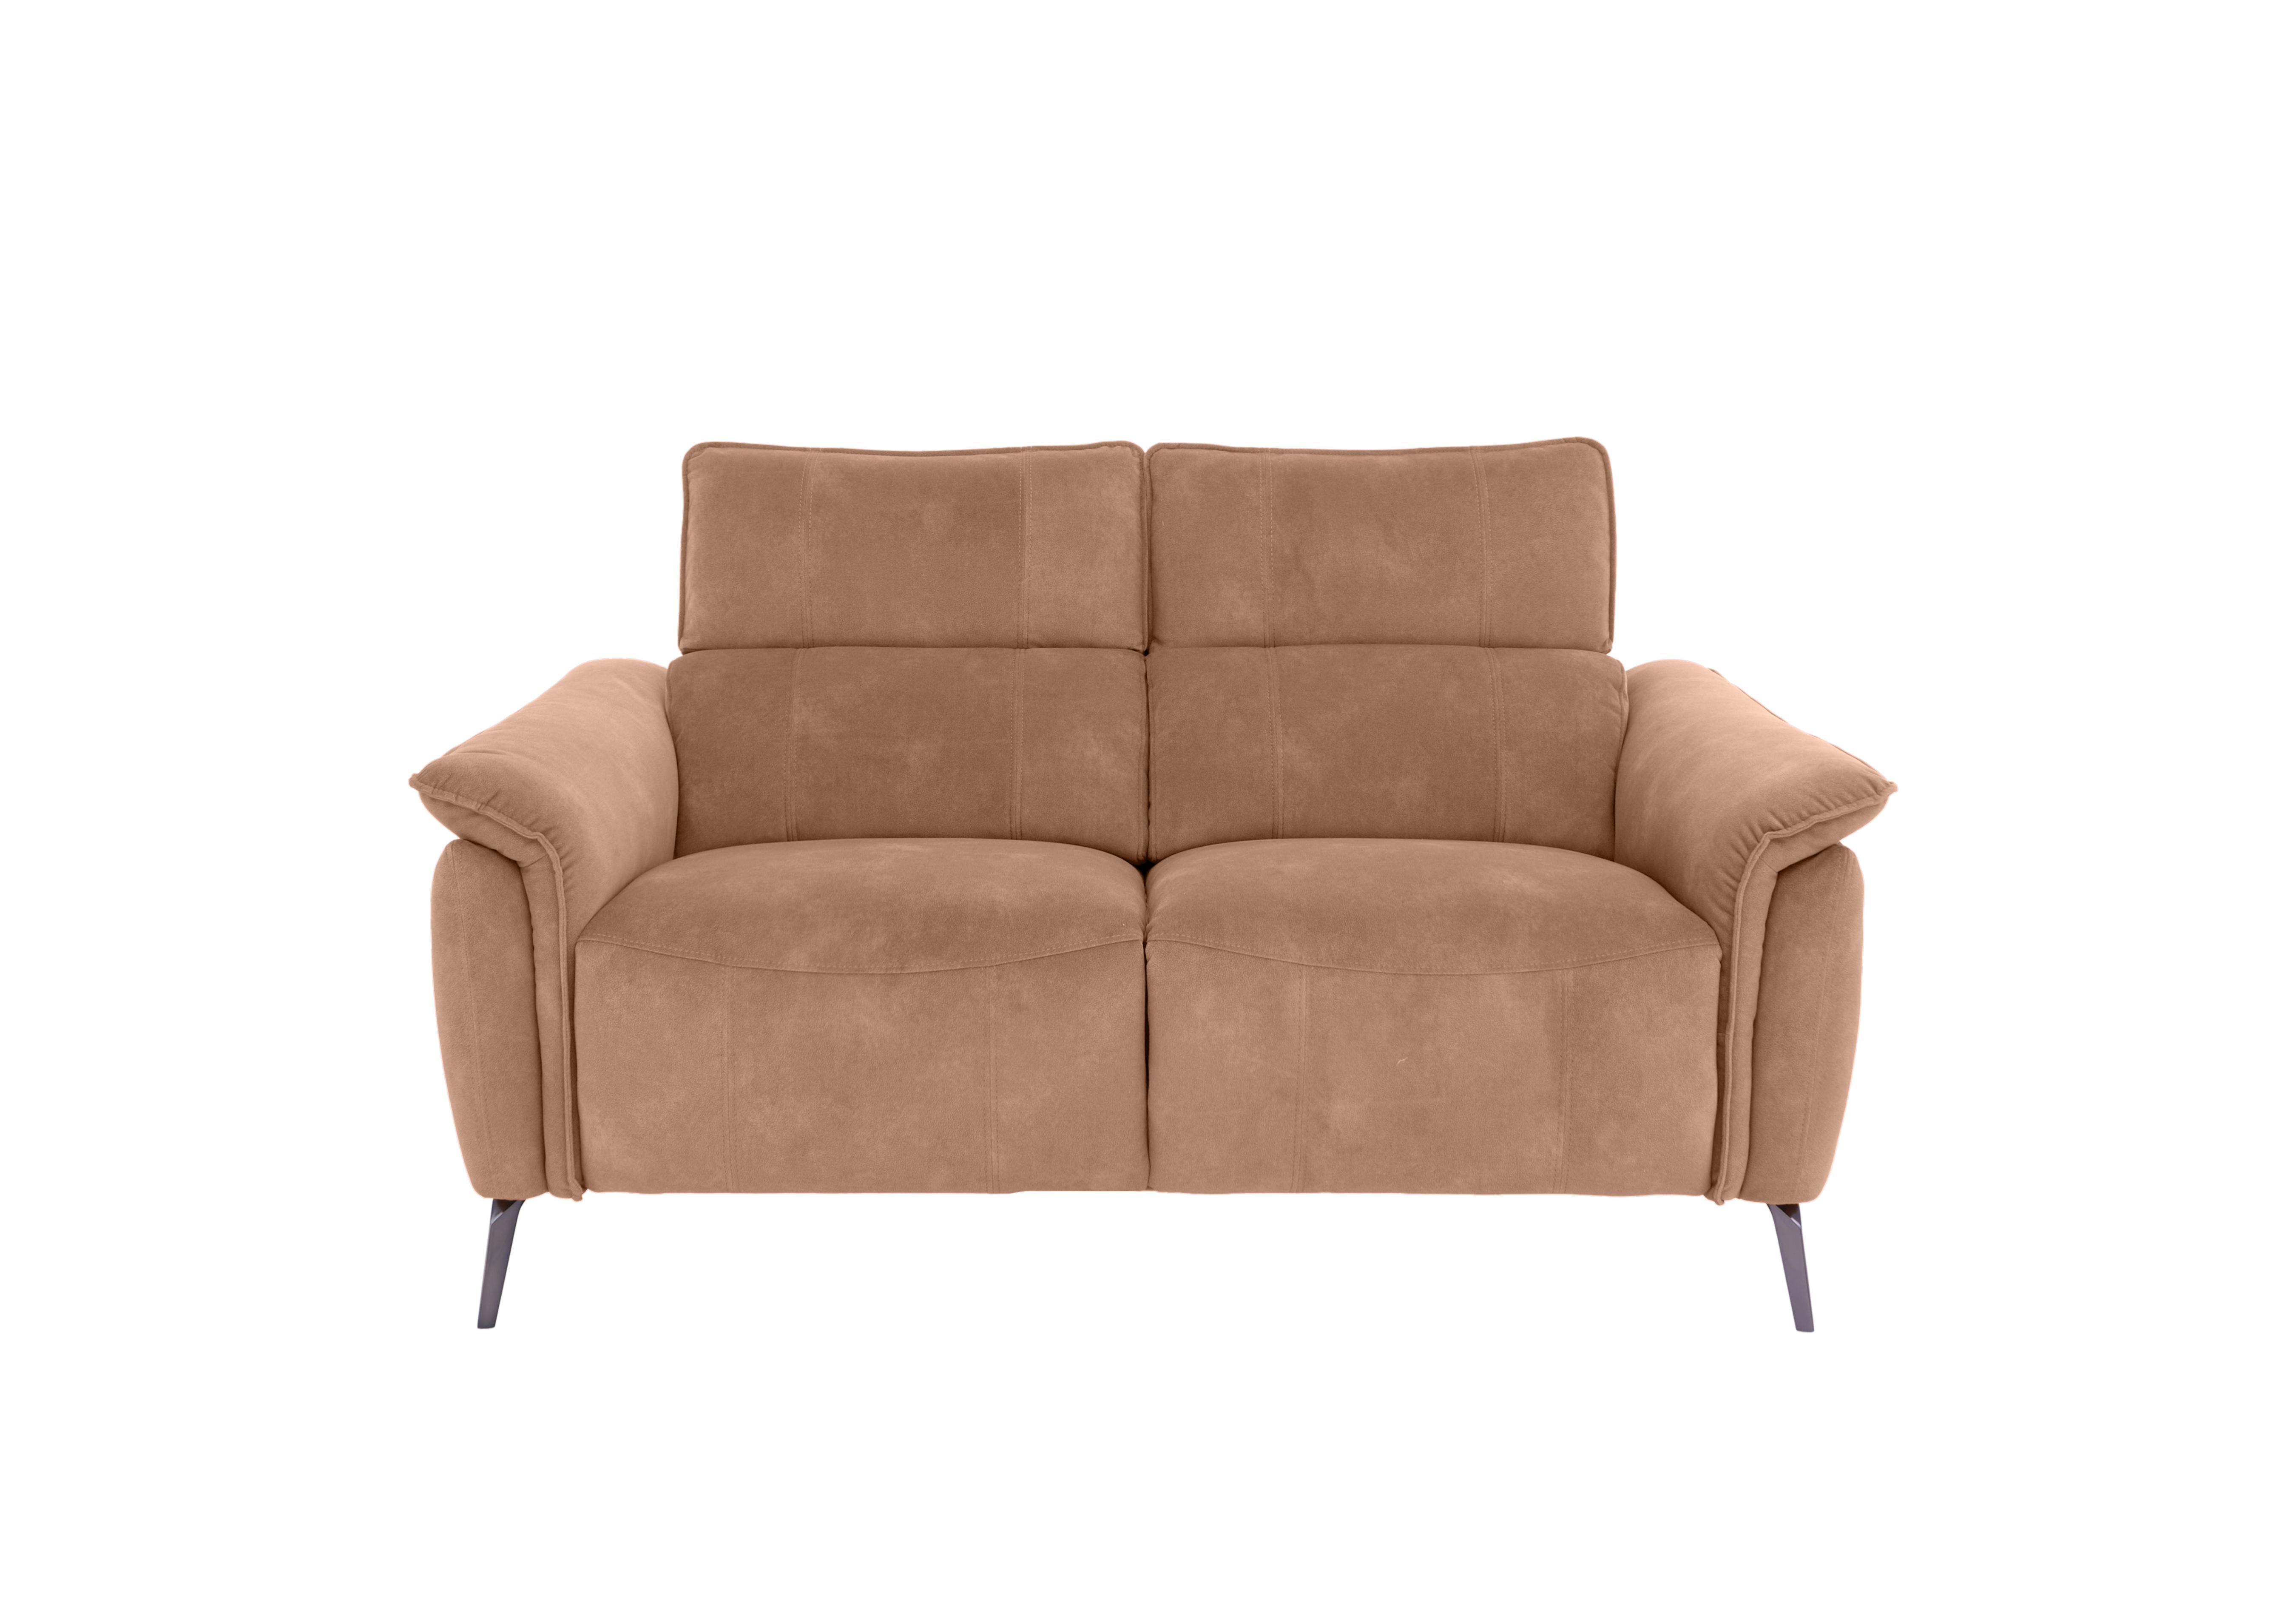 Jude 2 Seater Fabric Sofa in Sand Dexter 07 43507 on Furniture Village